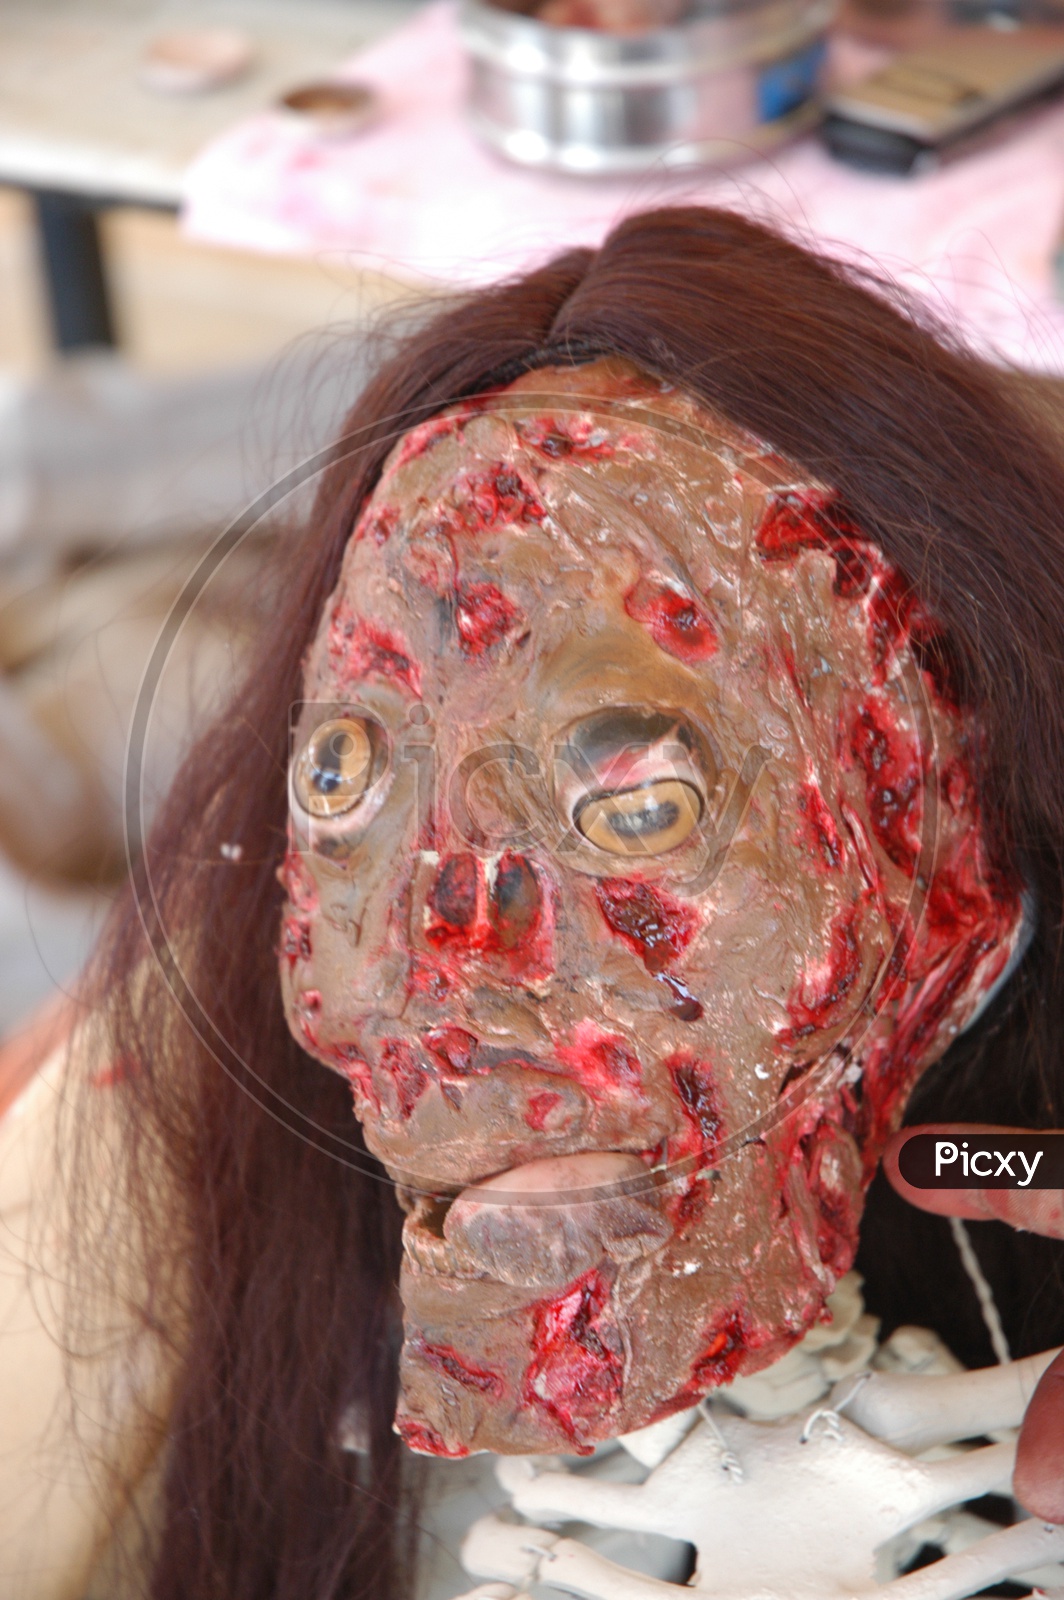 A burnt face mask on a woman  - Movie scene